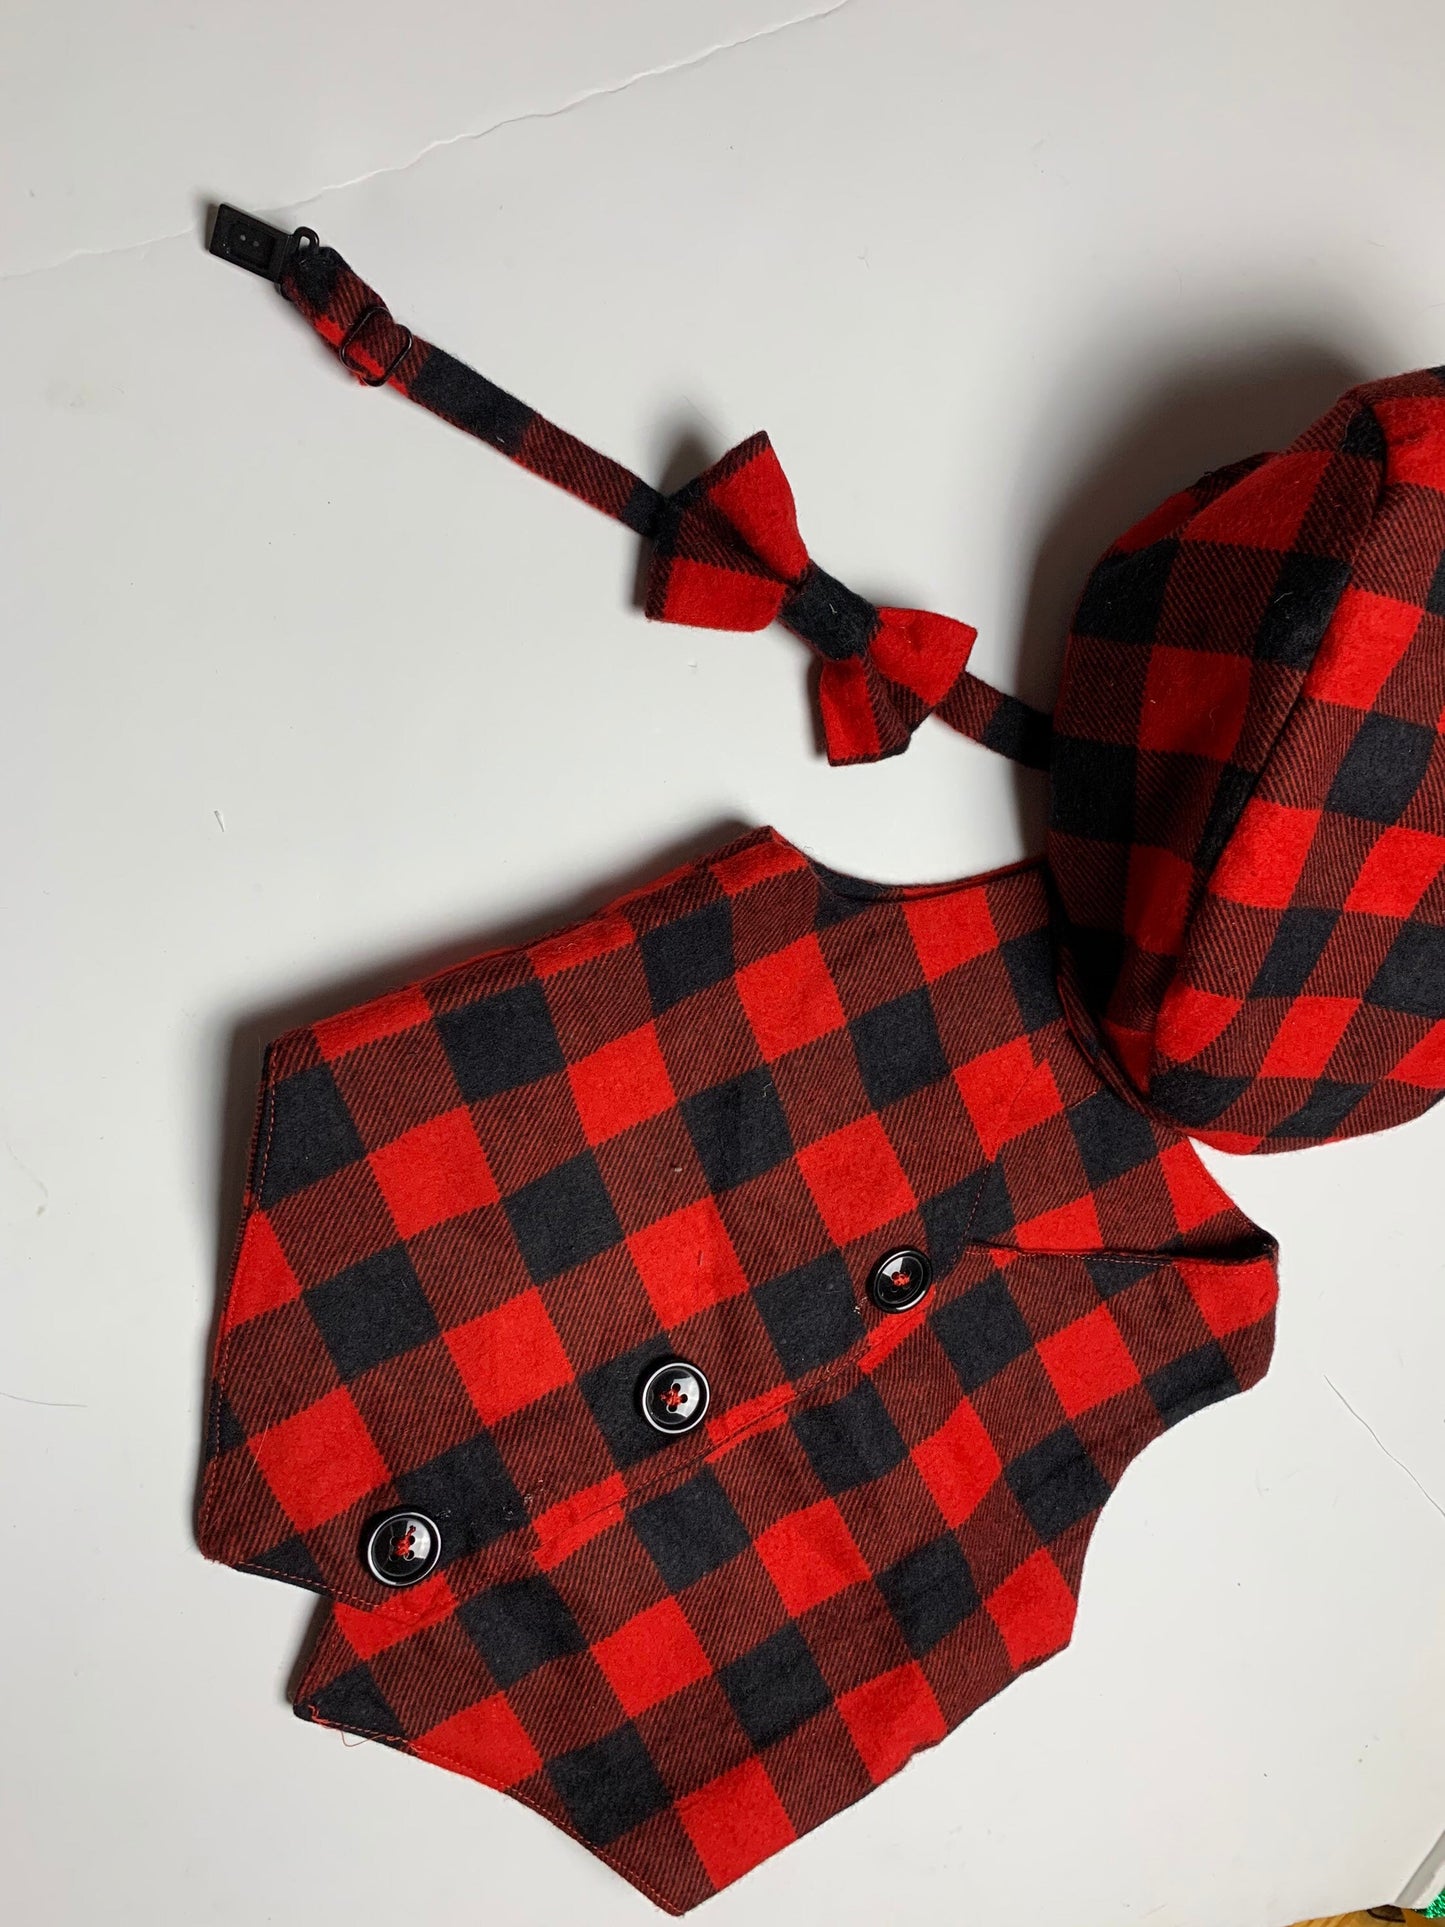 Boys red vest and bow tie Toddler boy vest Baby boy bow tie Infant vest boy Christmas outfit Page boy outfit Boy vest Toddler vest and tie